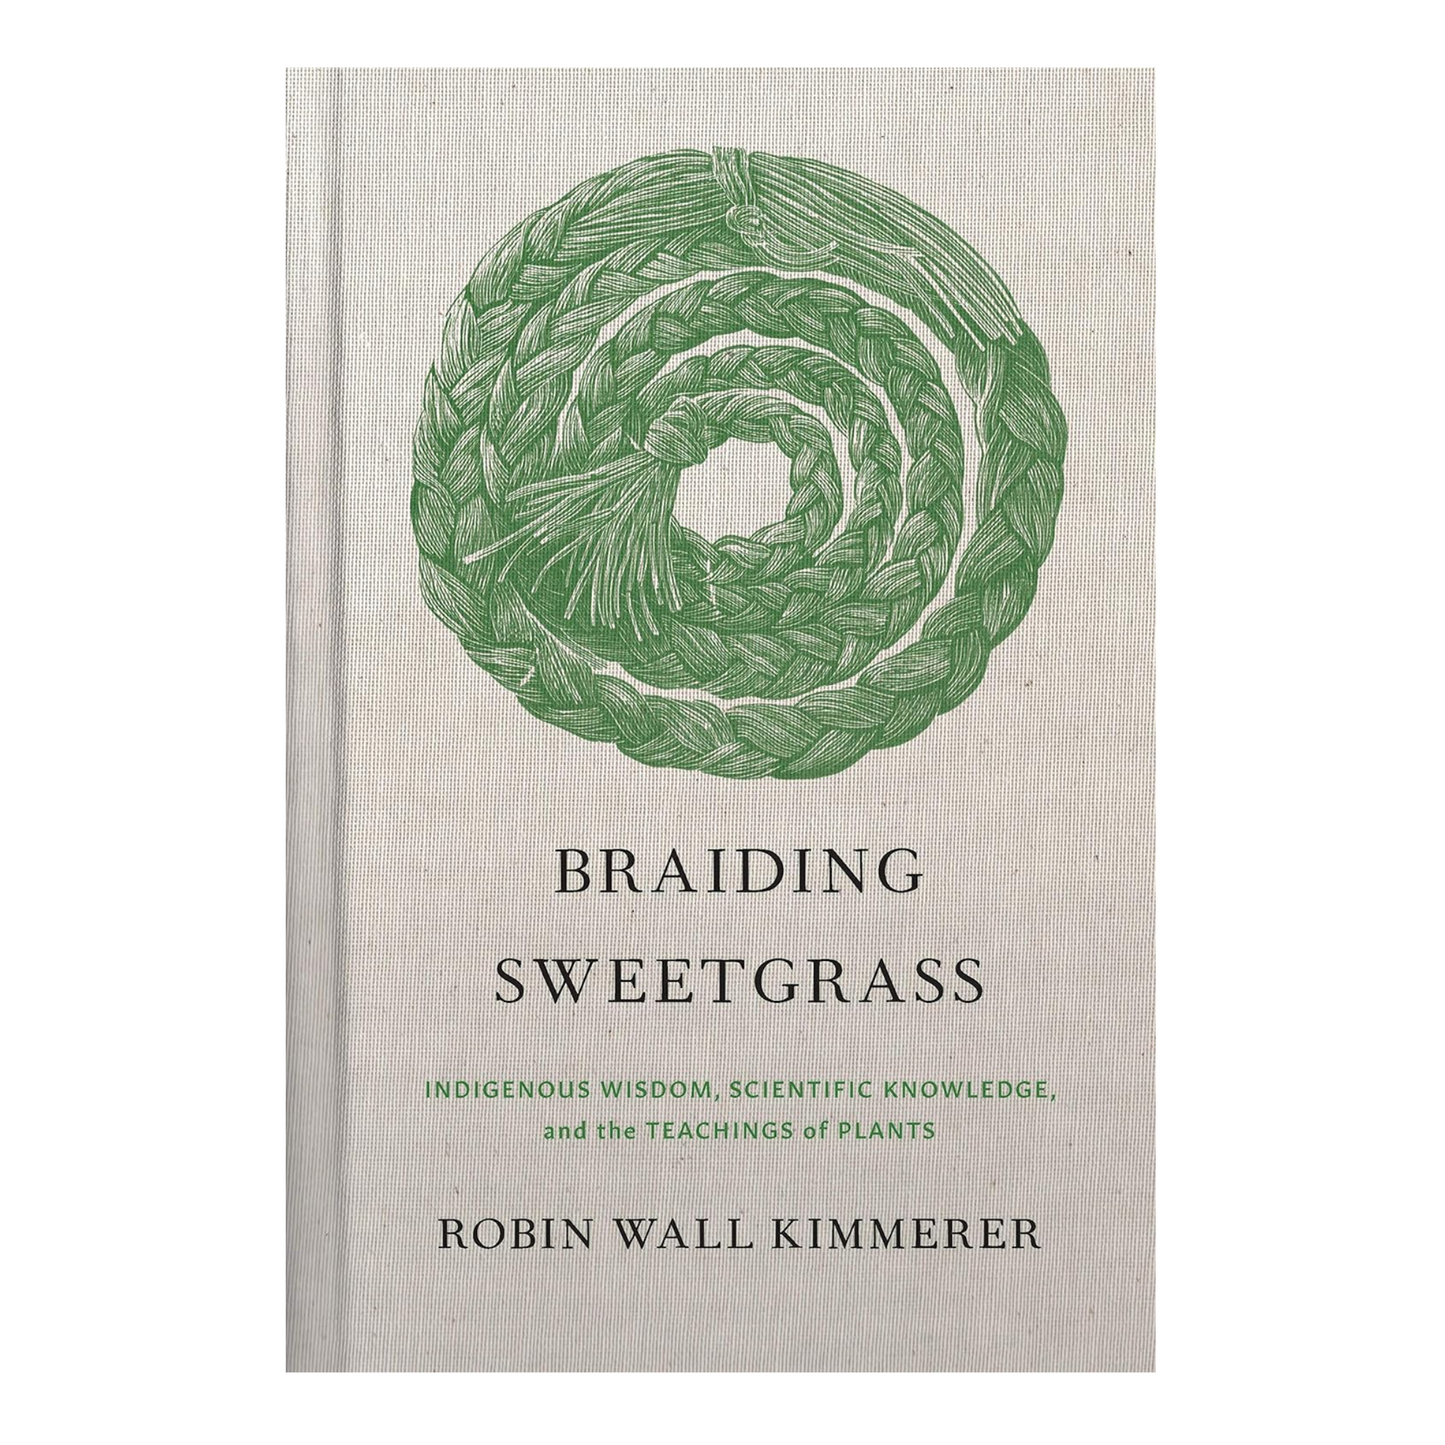 Braiding Sweetgrass by Robin Wall Kimmerer (Hardcover)